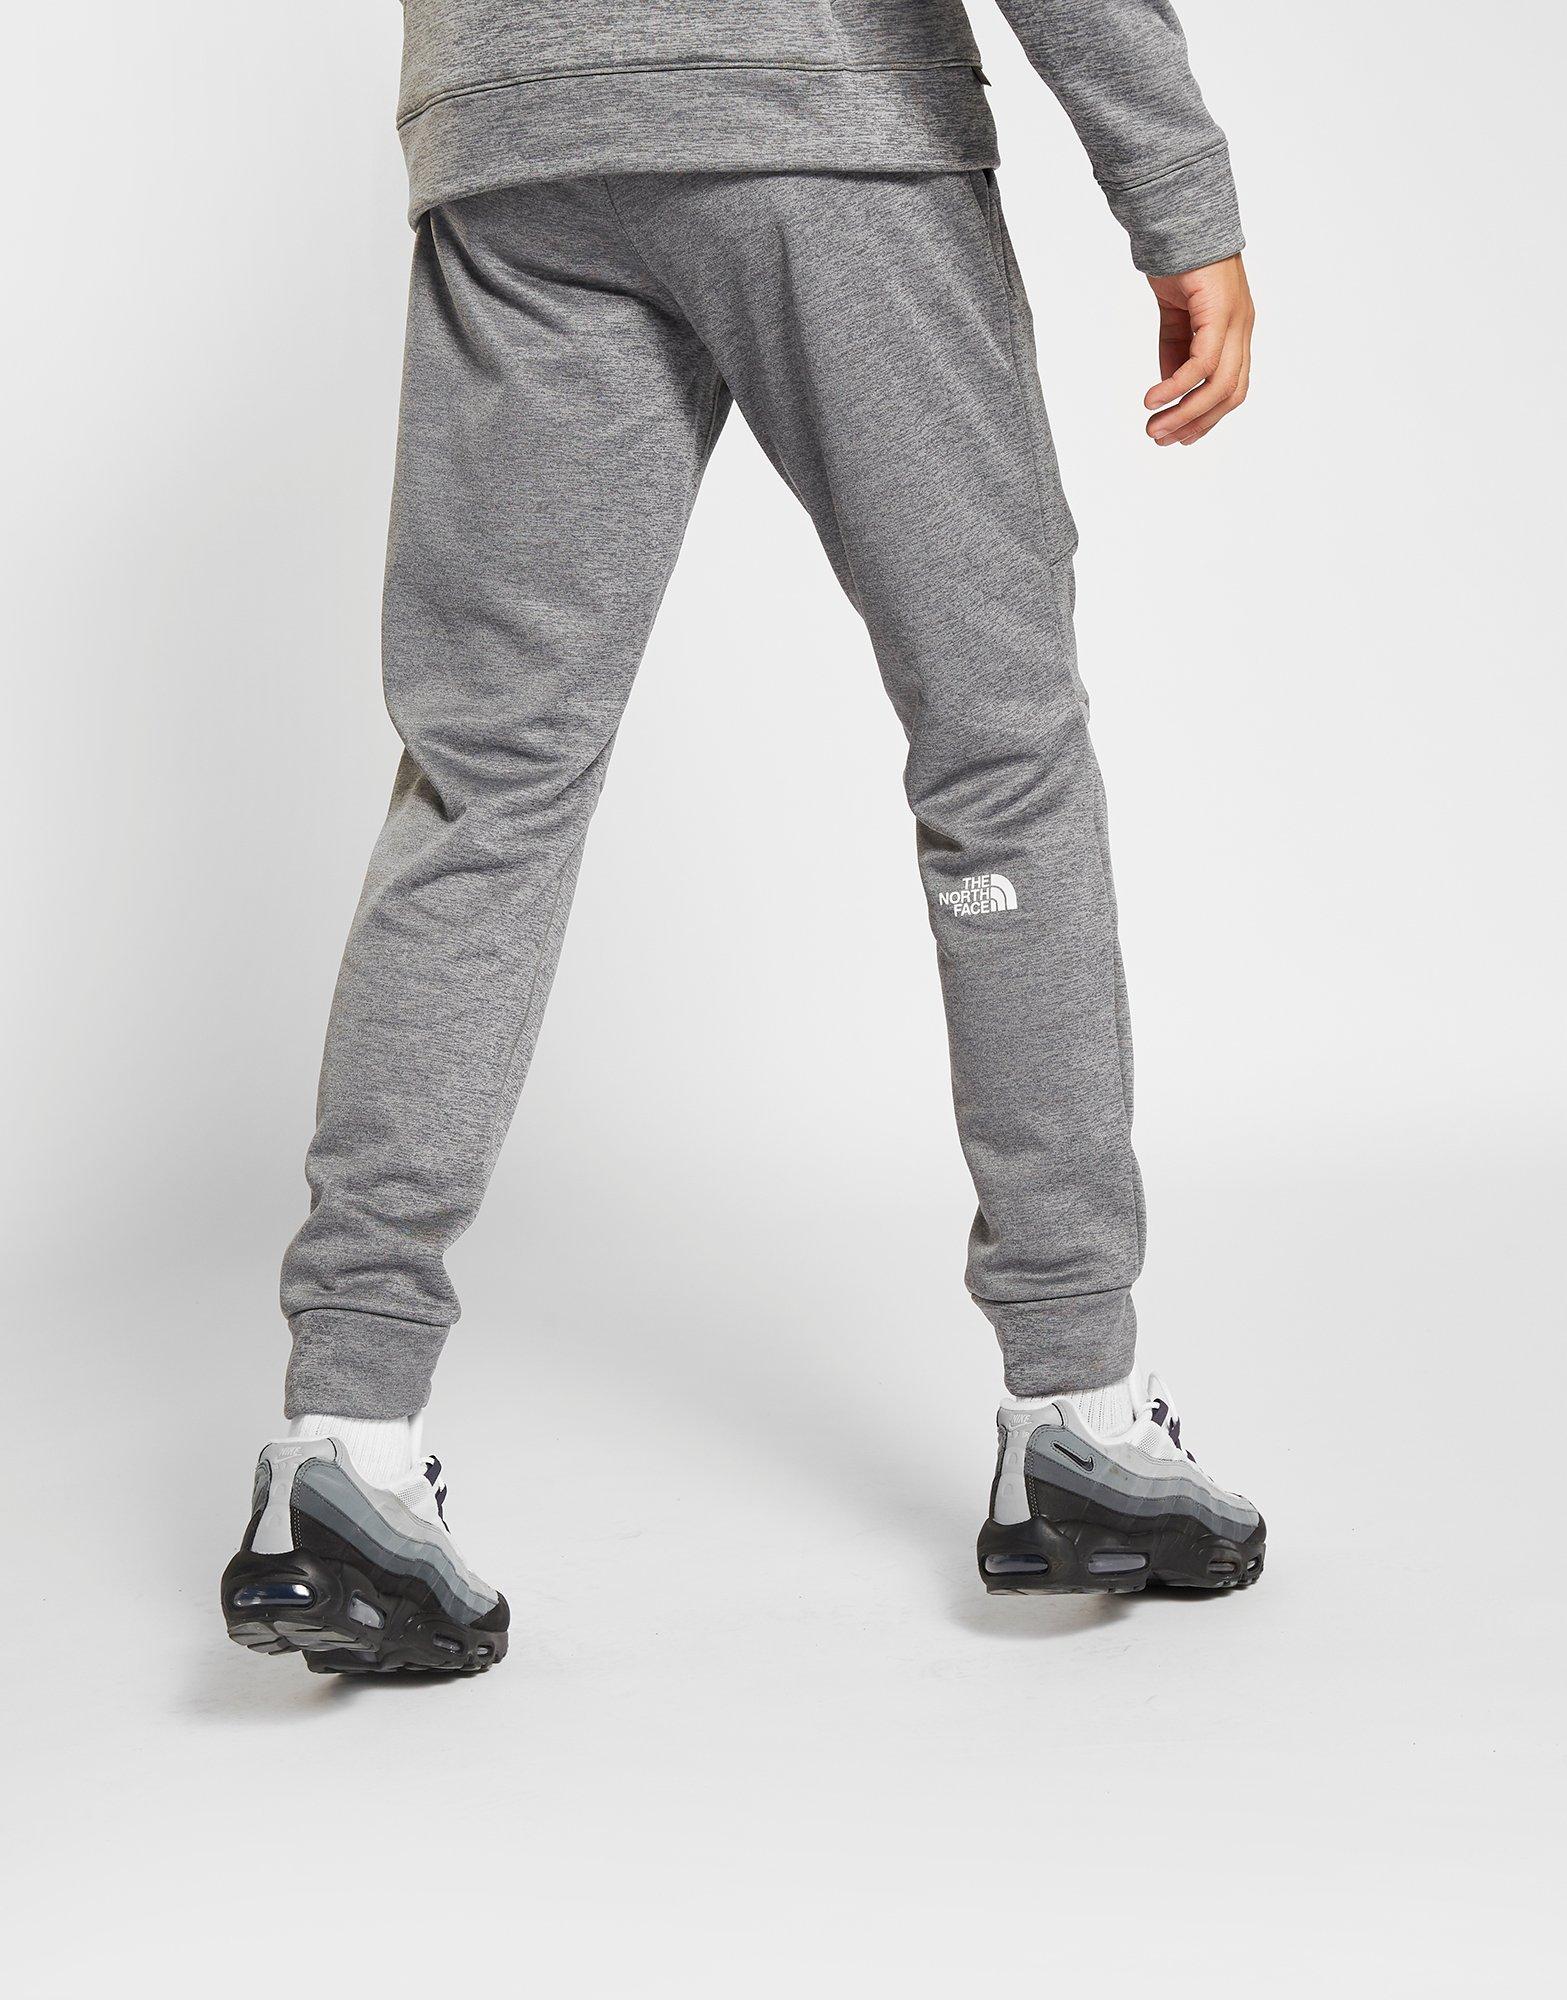 north face tracksuit pants